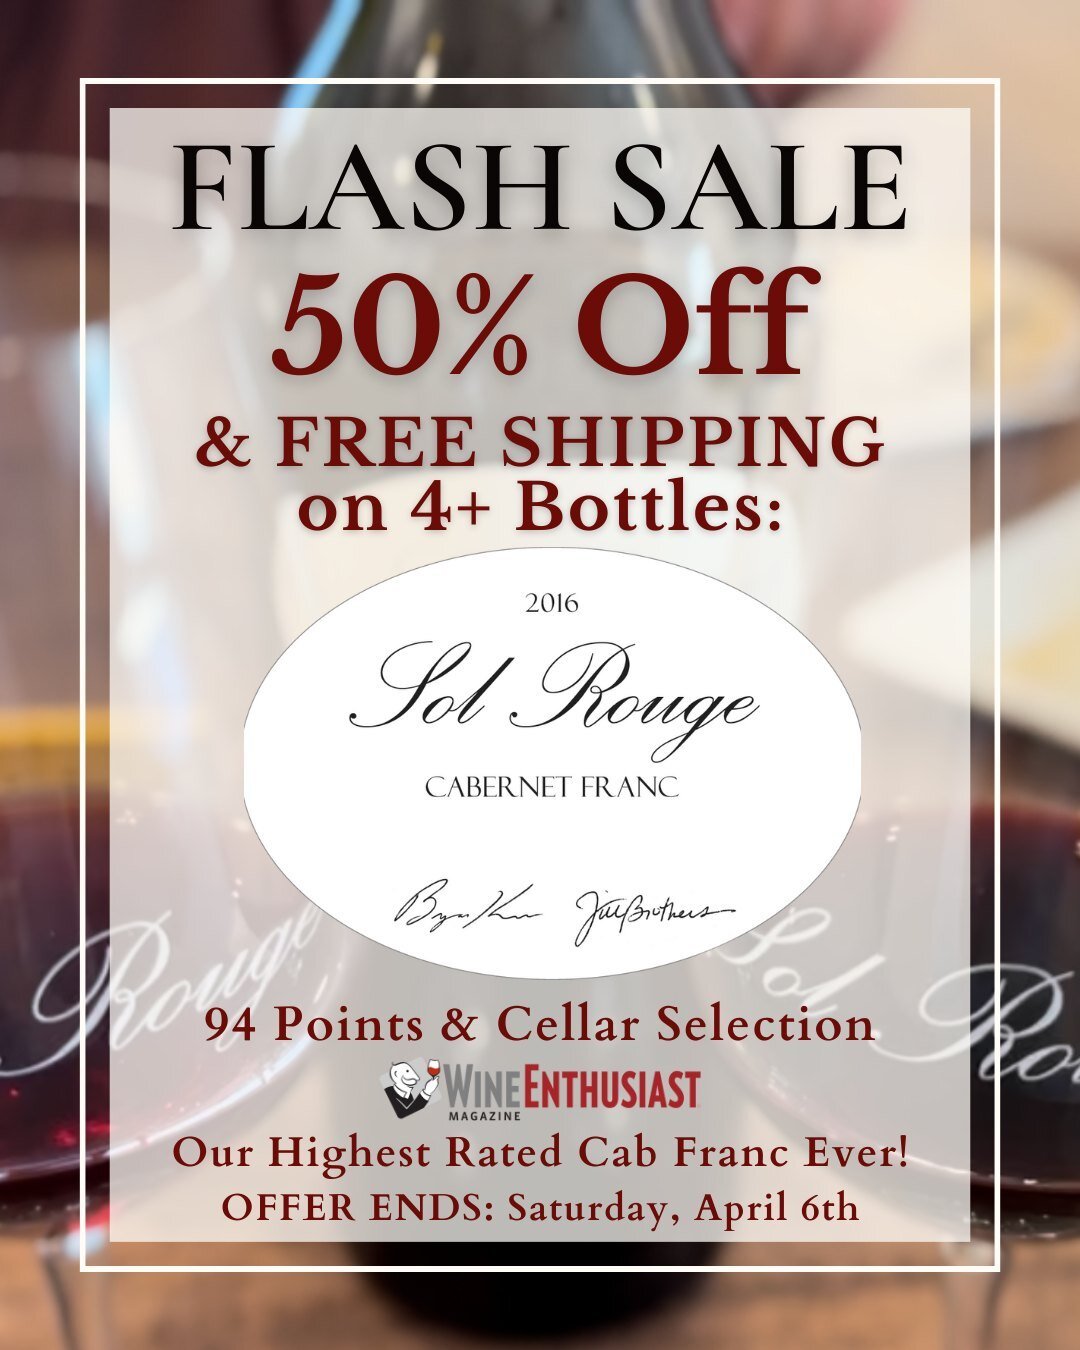 FLASH SALE: 50% OFF 94pt Cabernet Franc + Free Shipping from Sol Rouge Winery! Get our 2016 Sol Rouge Cabernet Franc, rated 94 points by Wine Enthusiast Magazine, for 50% OFF a 4 bottle set + FREE ground shipping. Offer ends Saturday, April 6th! http